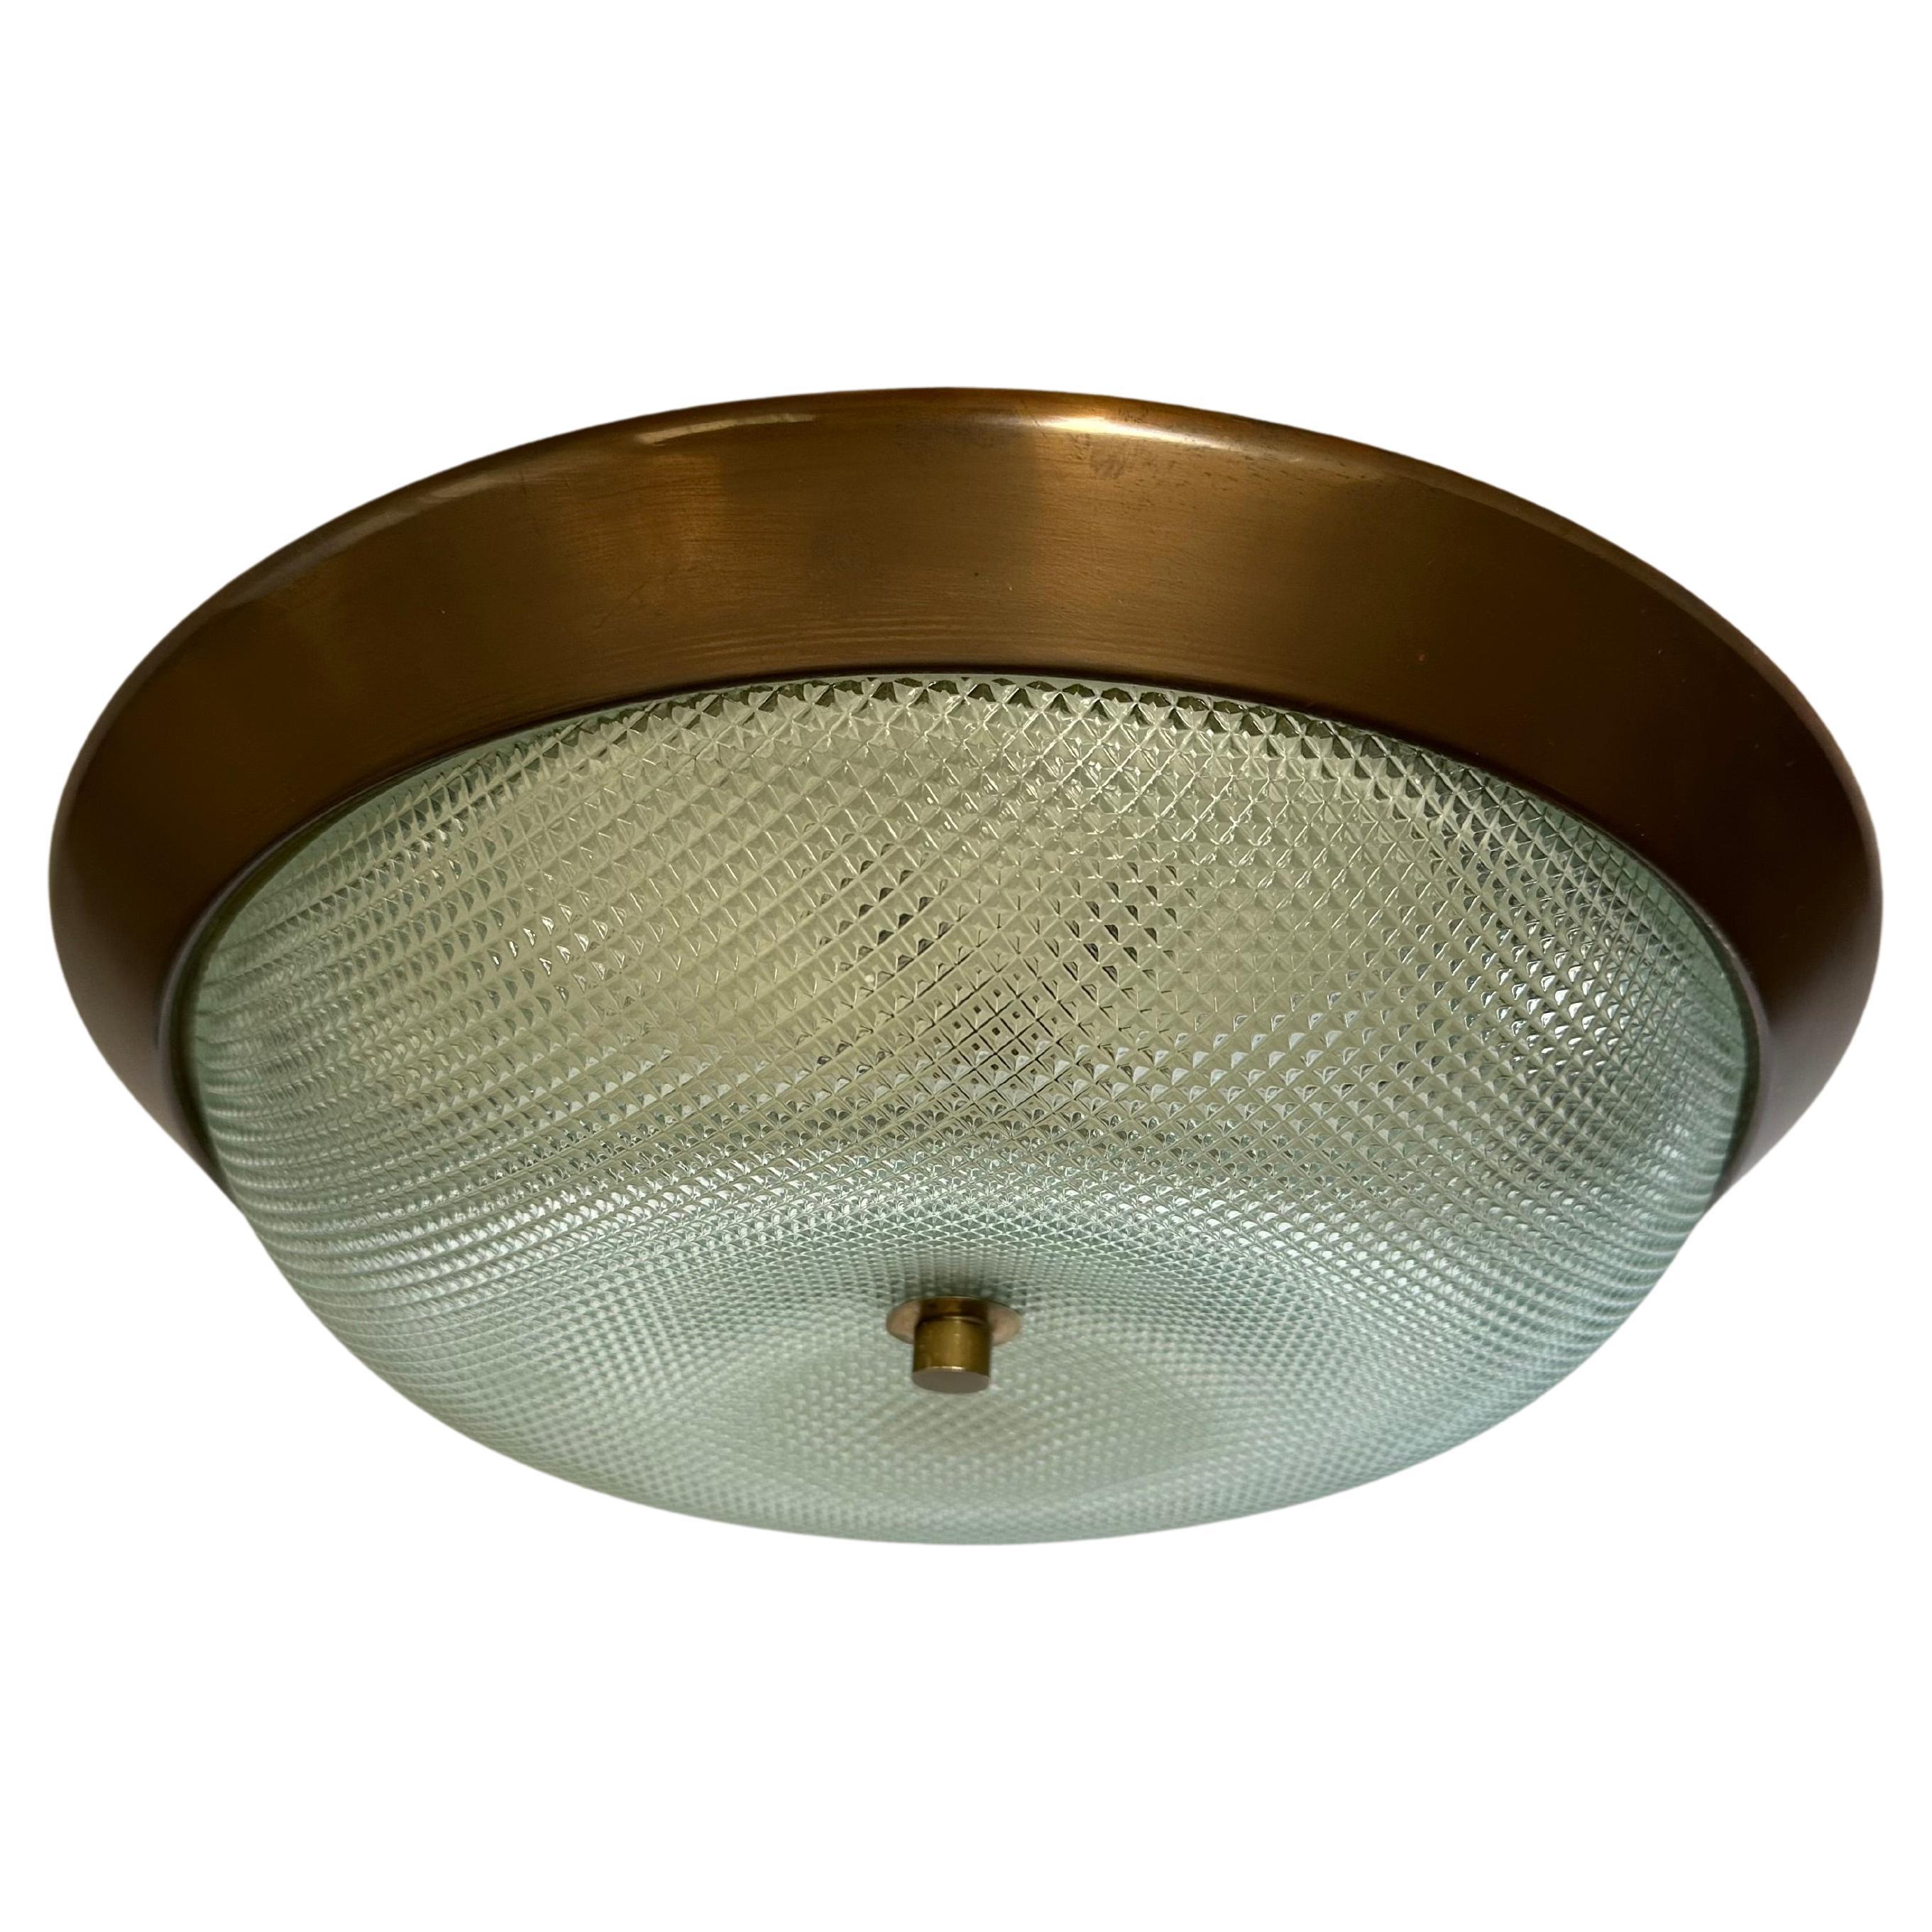 Flush mount ceiling lights.
Designed and made in Italy in 1960s
Textured glass, patinated brass.
Takes 3 candelabra bulbs each.
Complimentary US rewiring upon request.
Three flush mounts are available.
Price is for one flush mount.

We take pride in